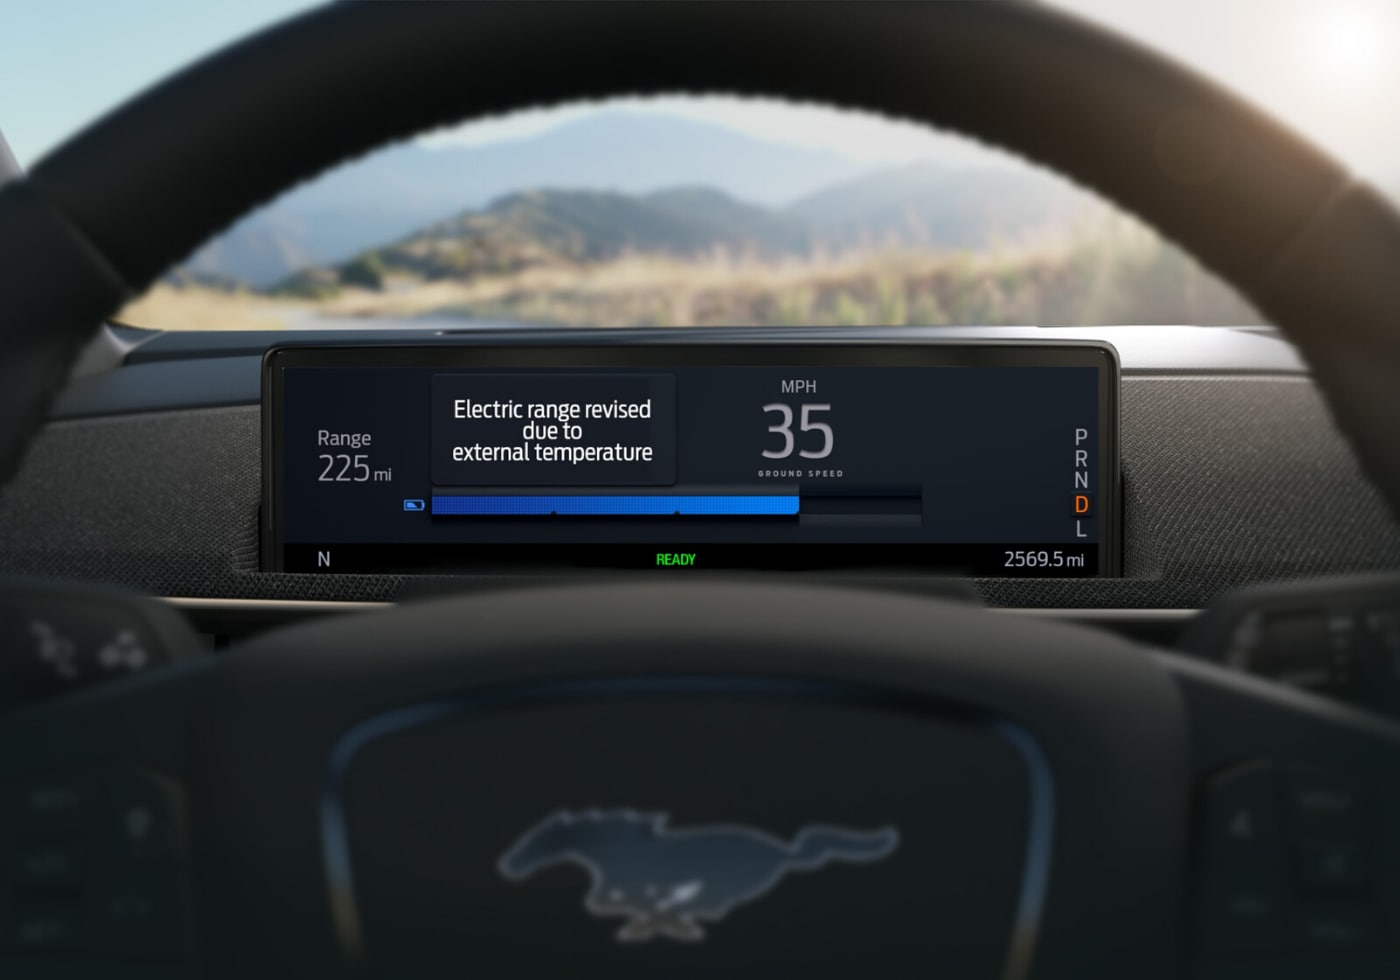 The Intelligent Range predictive technology instrument cluster view included inside the 2021 Ford Mustang Mach-E